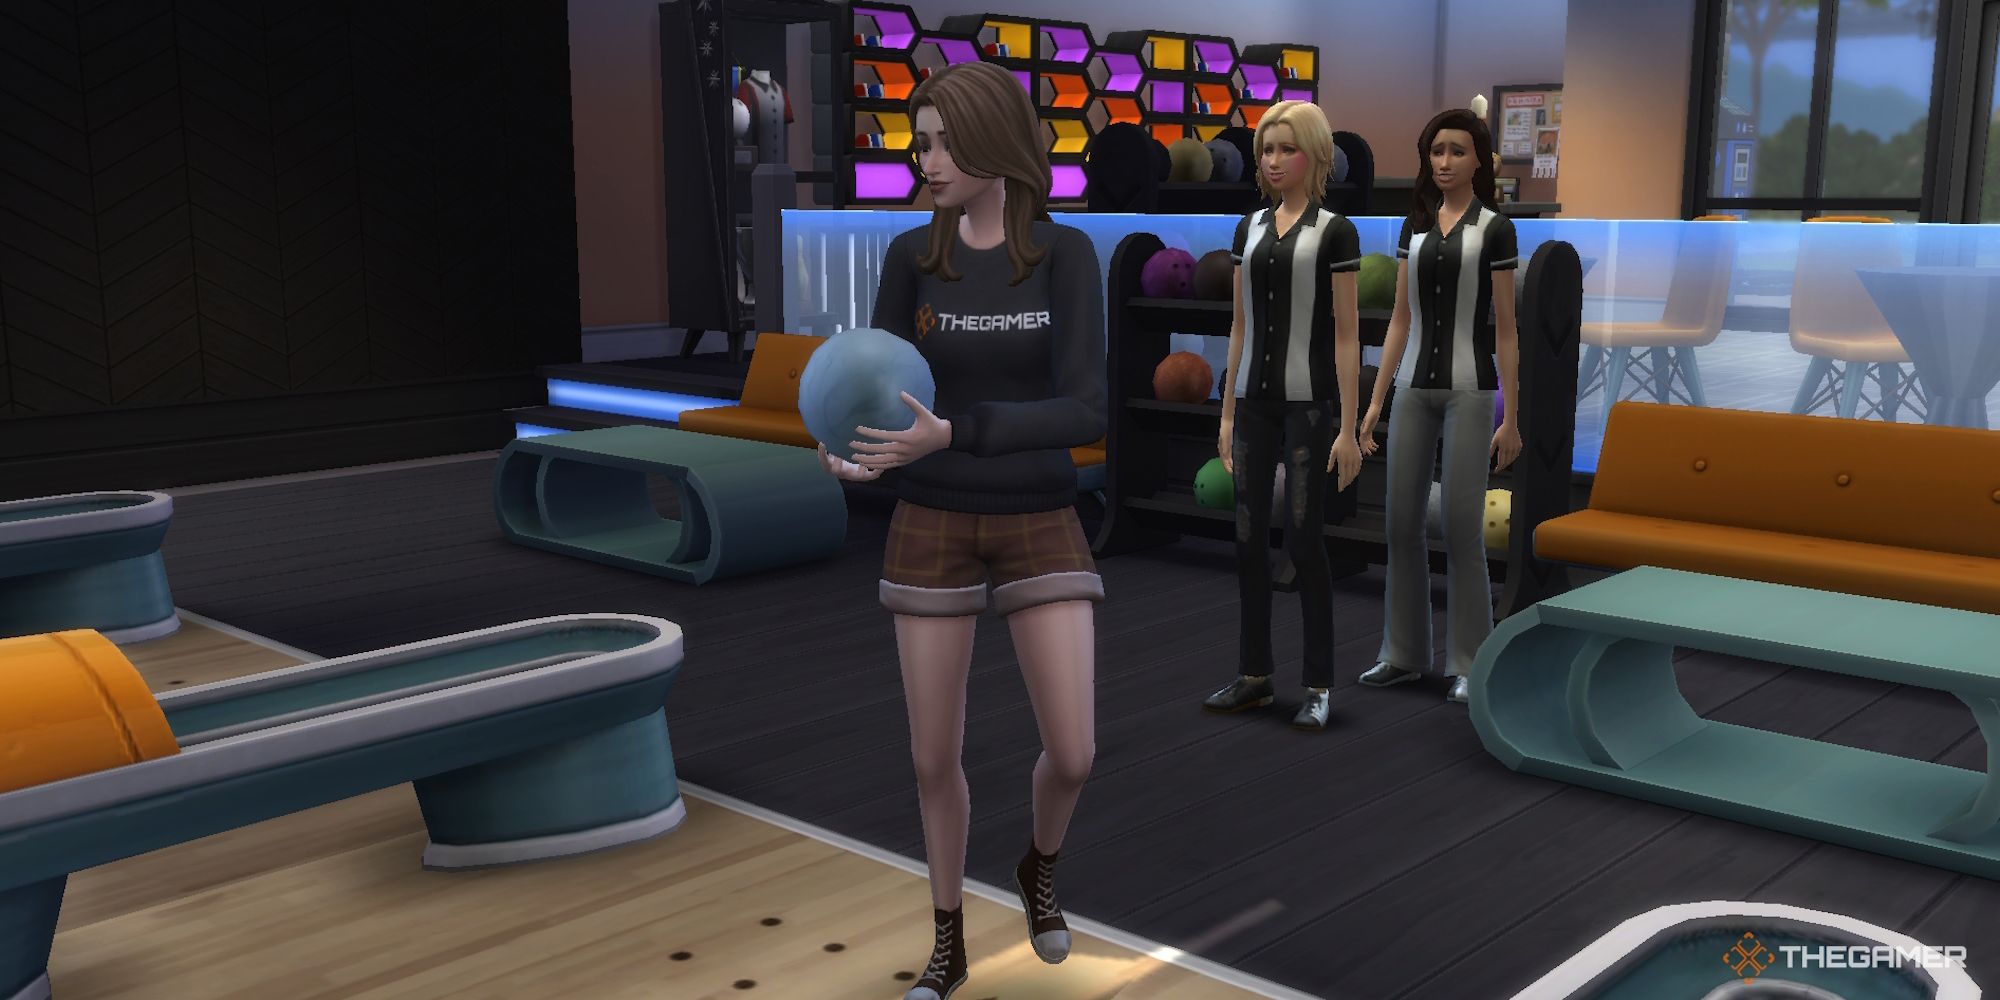 The Sims 4 Fitness Stuff: A Day in the Life